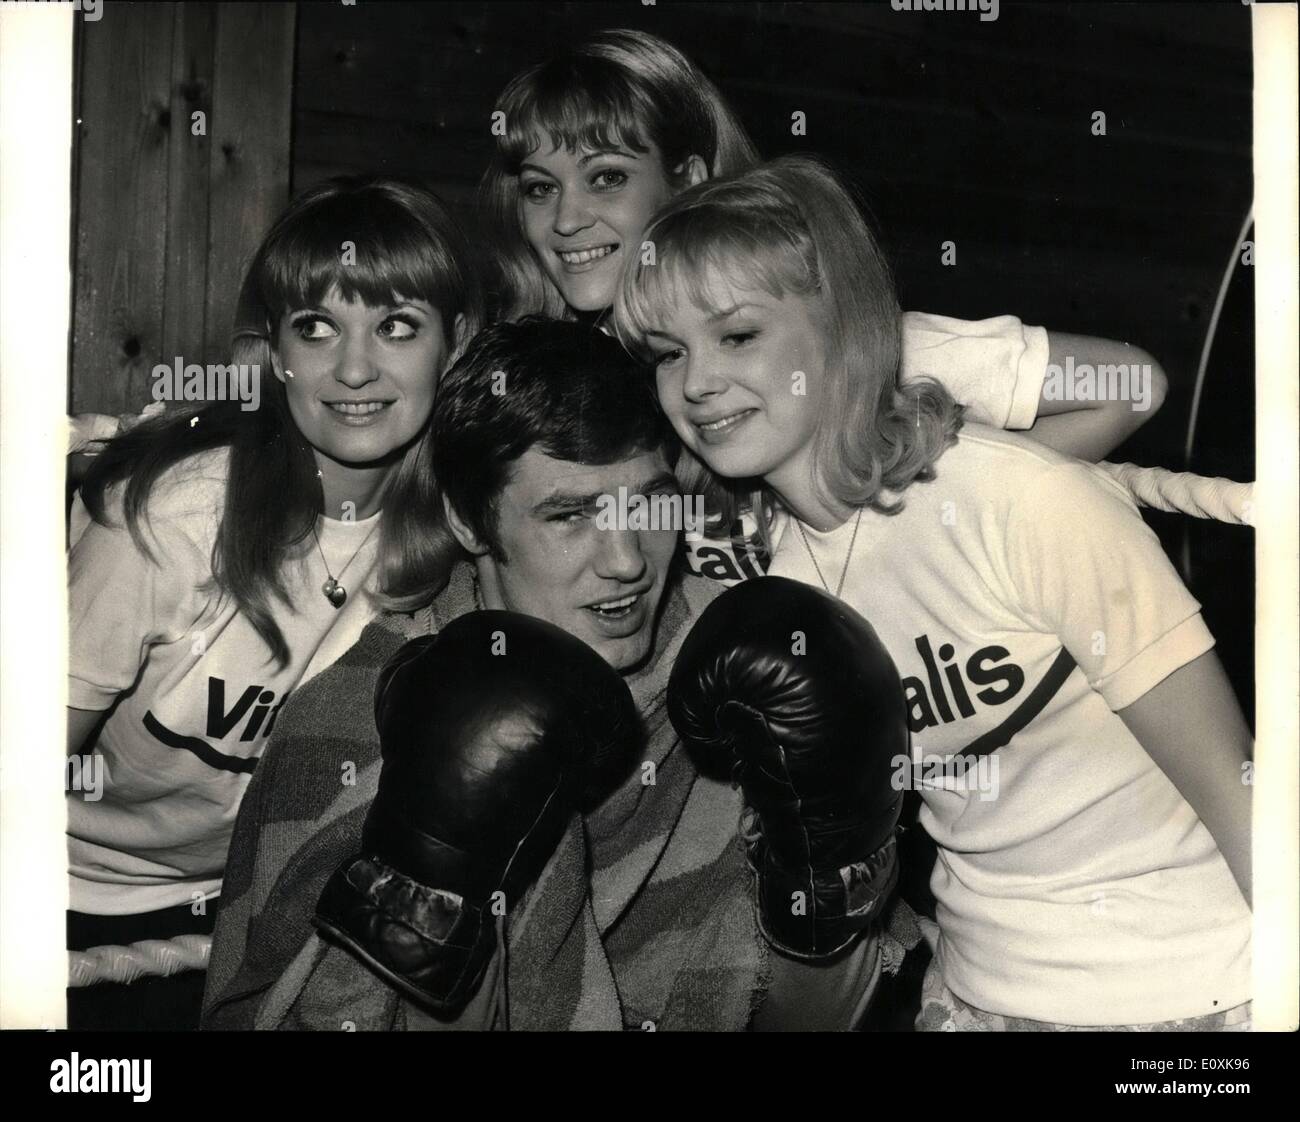 Mar. 03, 1967 - Billy Walker trains for Mildenberger fight: Billy Walker, was training today at Fobbing, near Pitsea, Essex, for his European heavyweight title fight against Karl Mildenberger, at Wembley on March 21. Keystone Photo Shows:- Billy Walker pictured with three pretty girls who came to watch him train today. They are (L to R): Heather Tracy, Jean Robinson and Lesile Hand. Stock Photo